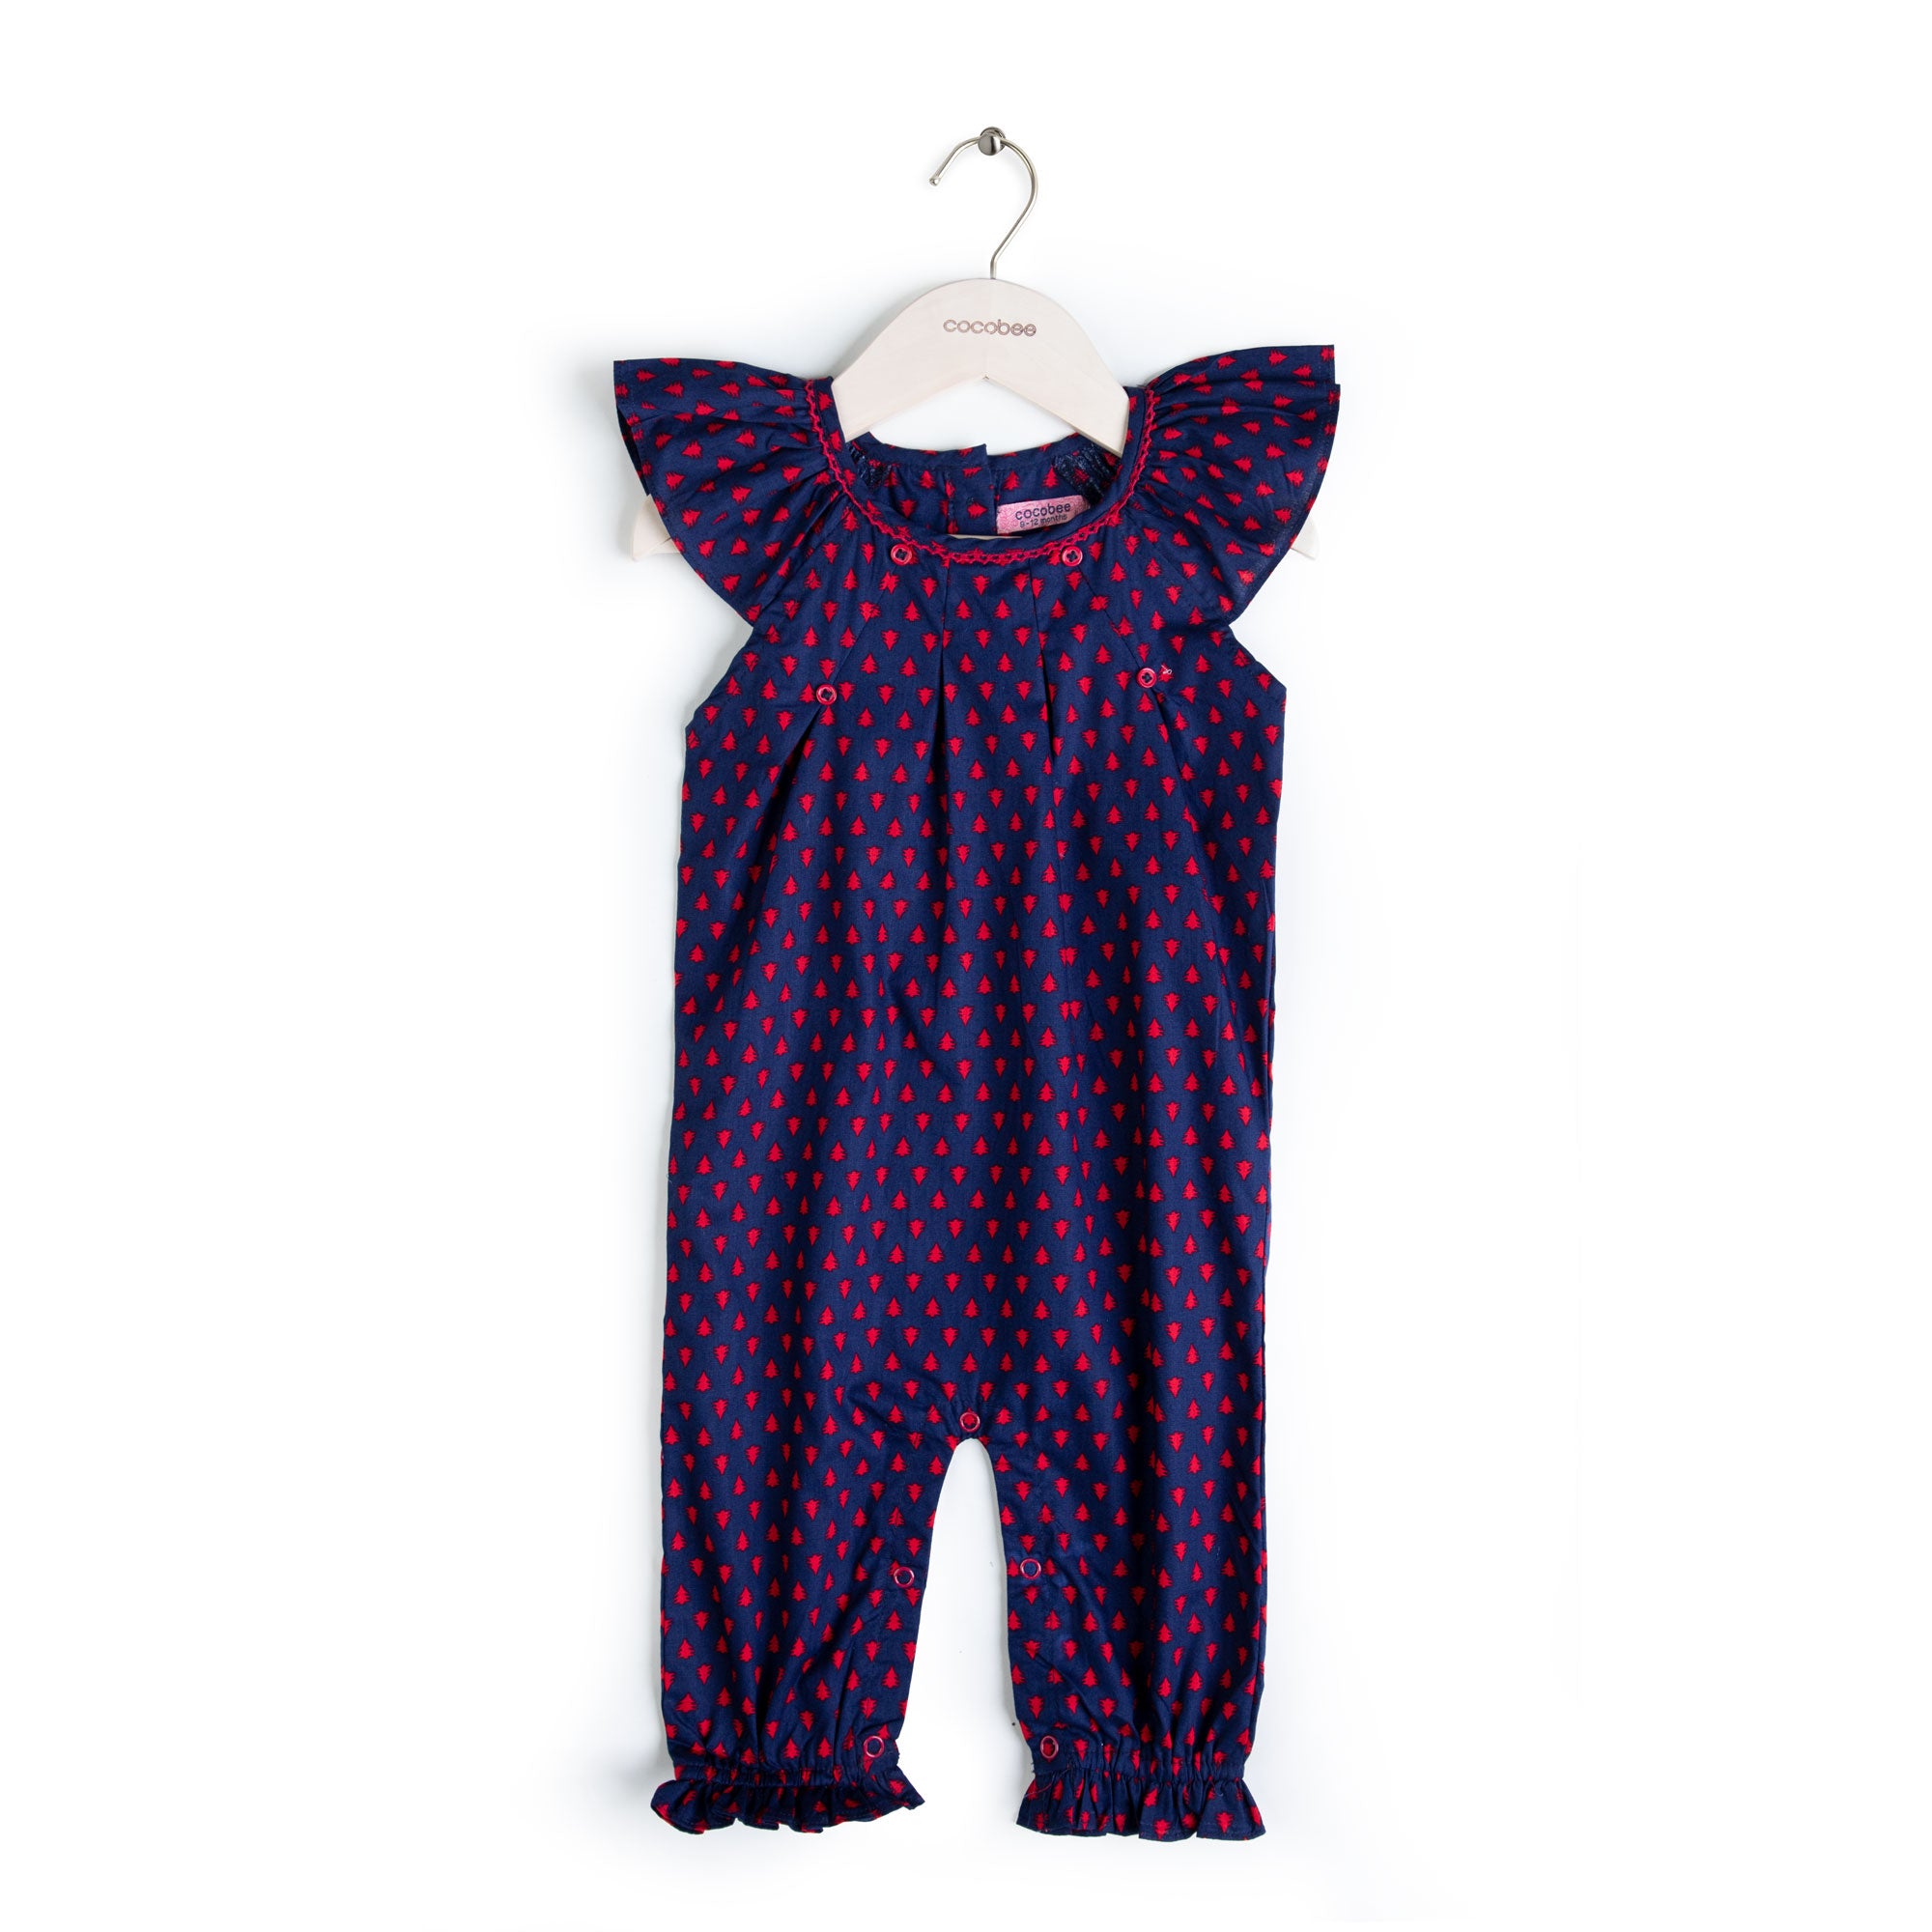 Colorful Jumpsuit for girls